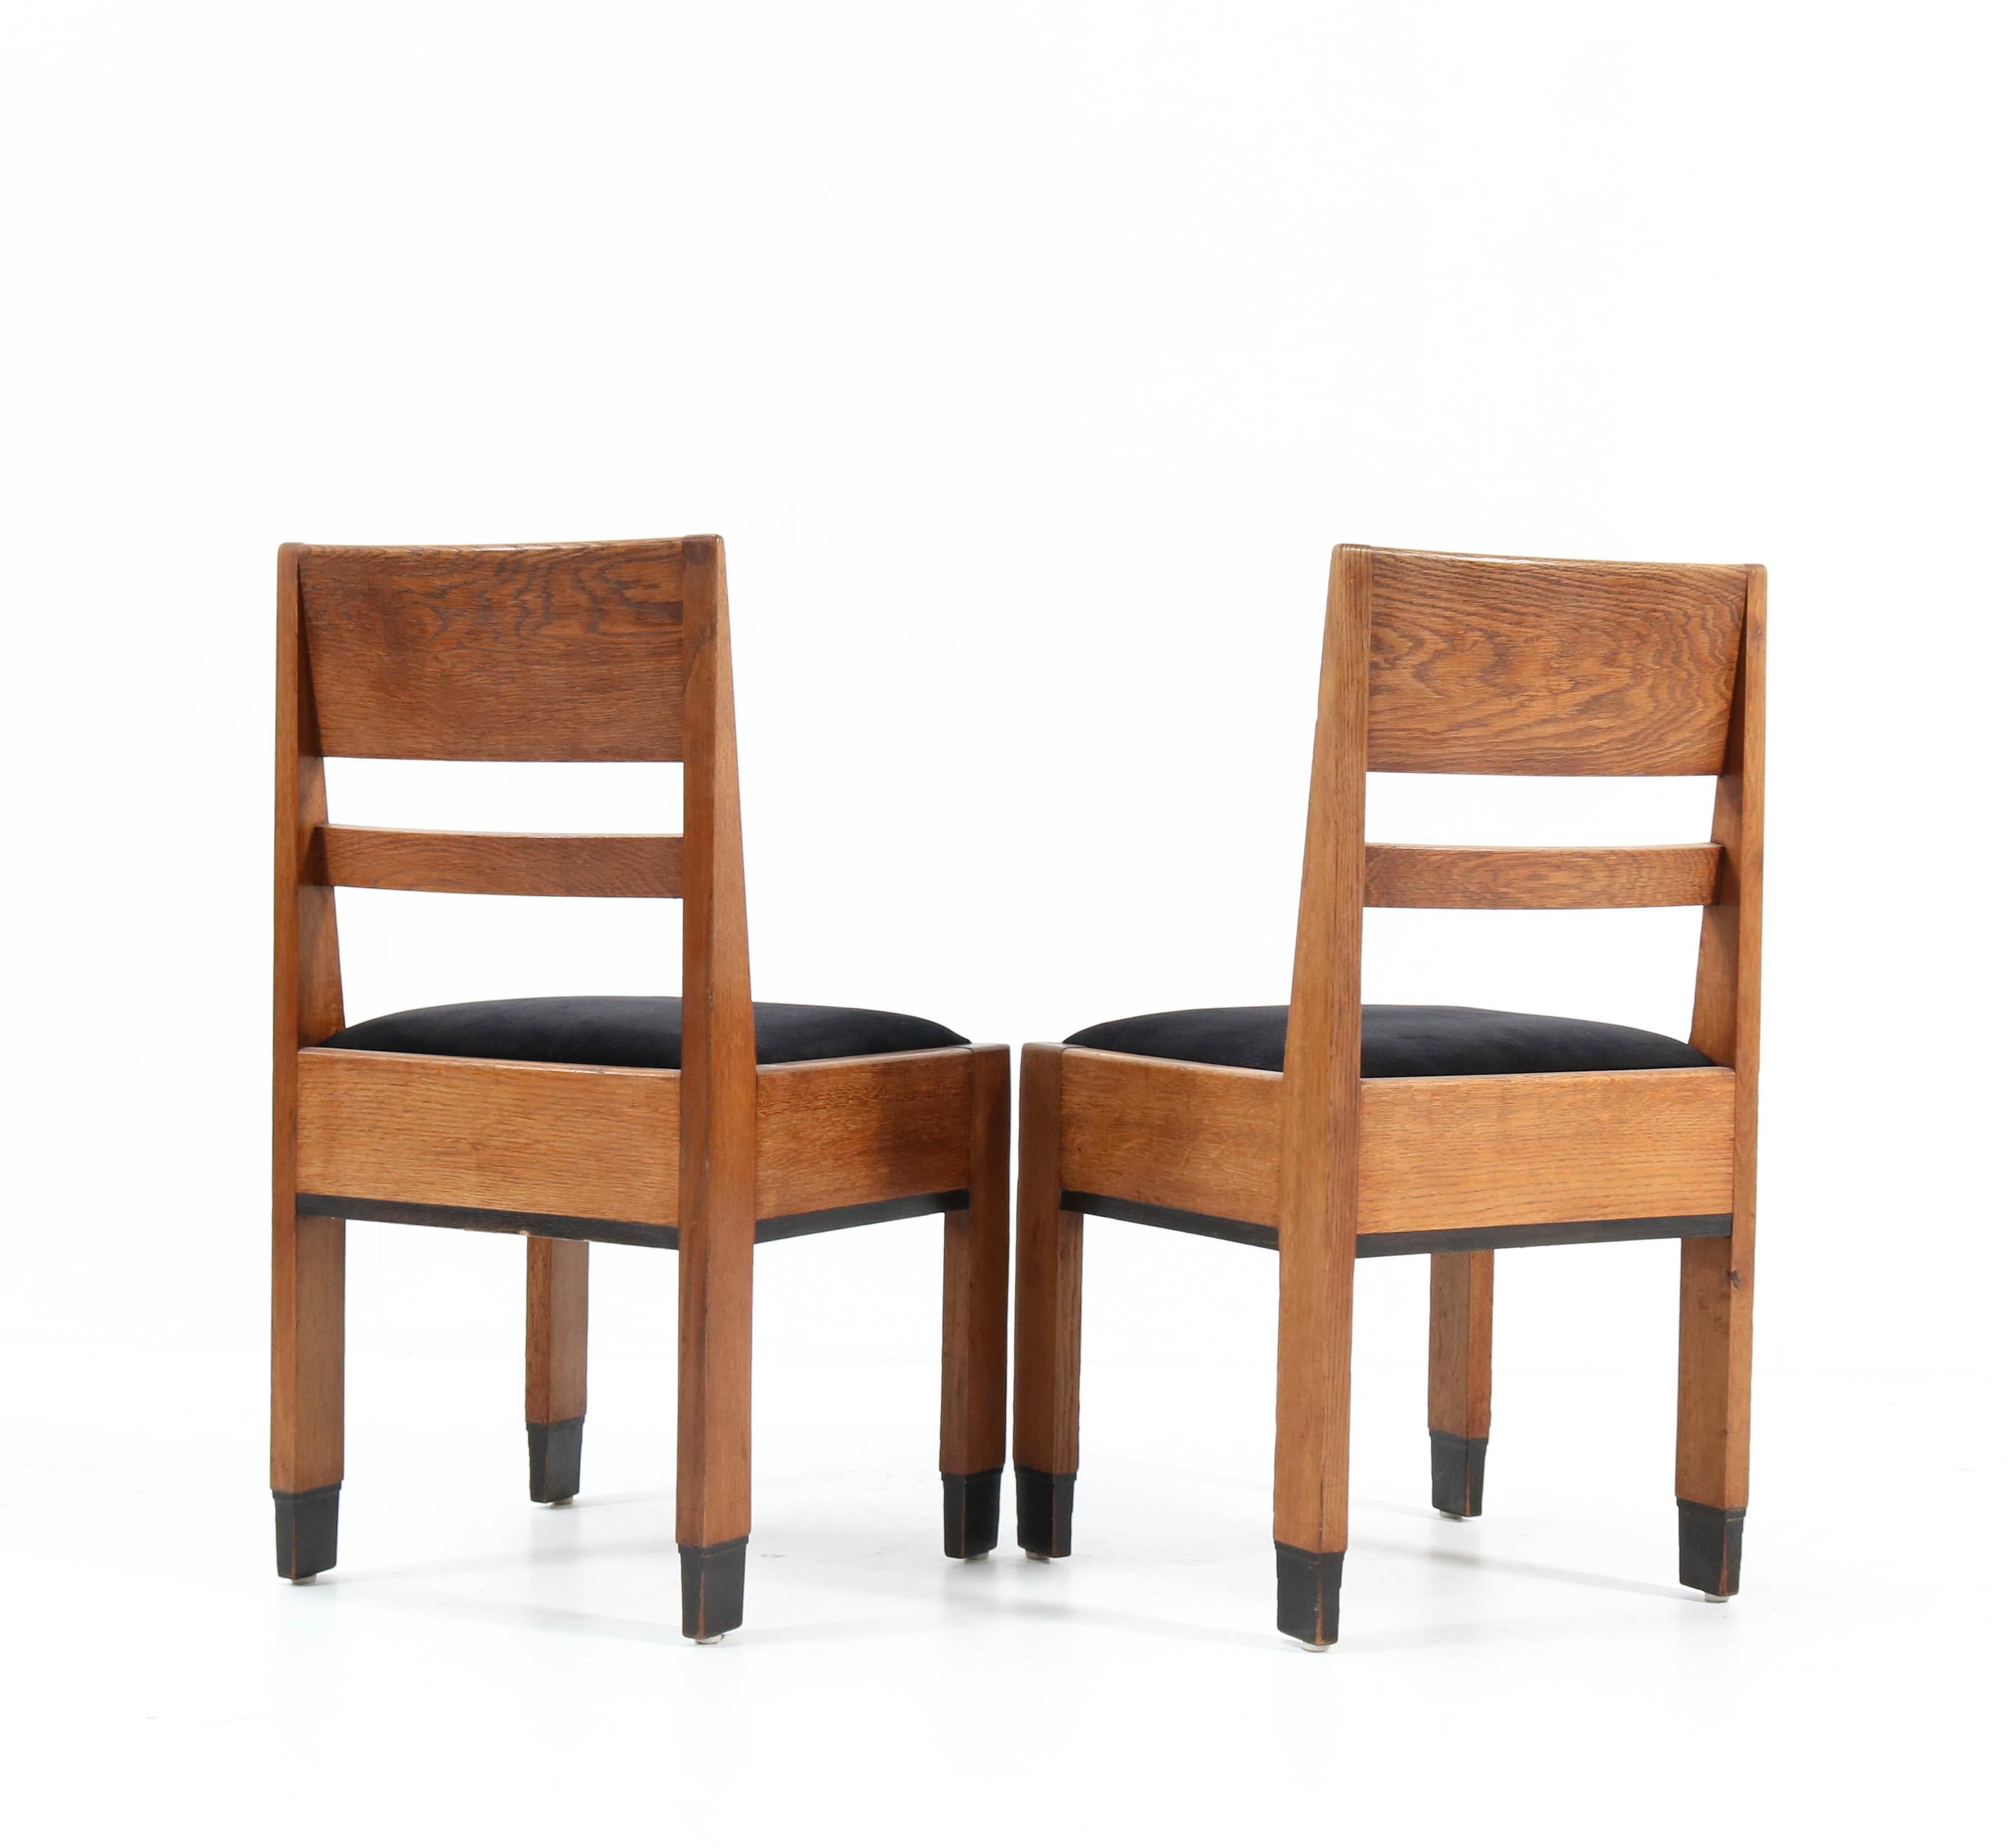 Eight Oak Art Deco Haagse School Chairs by H. Fels for L.O.V. Oosterbeek, 1924 3